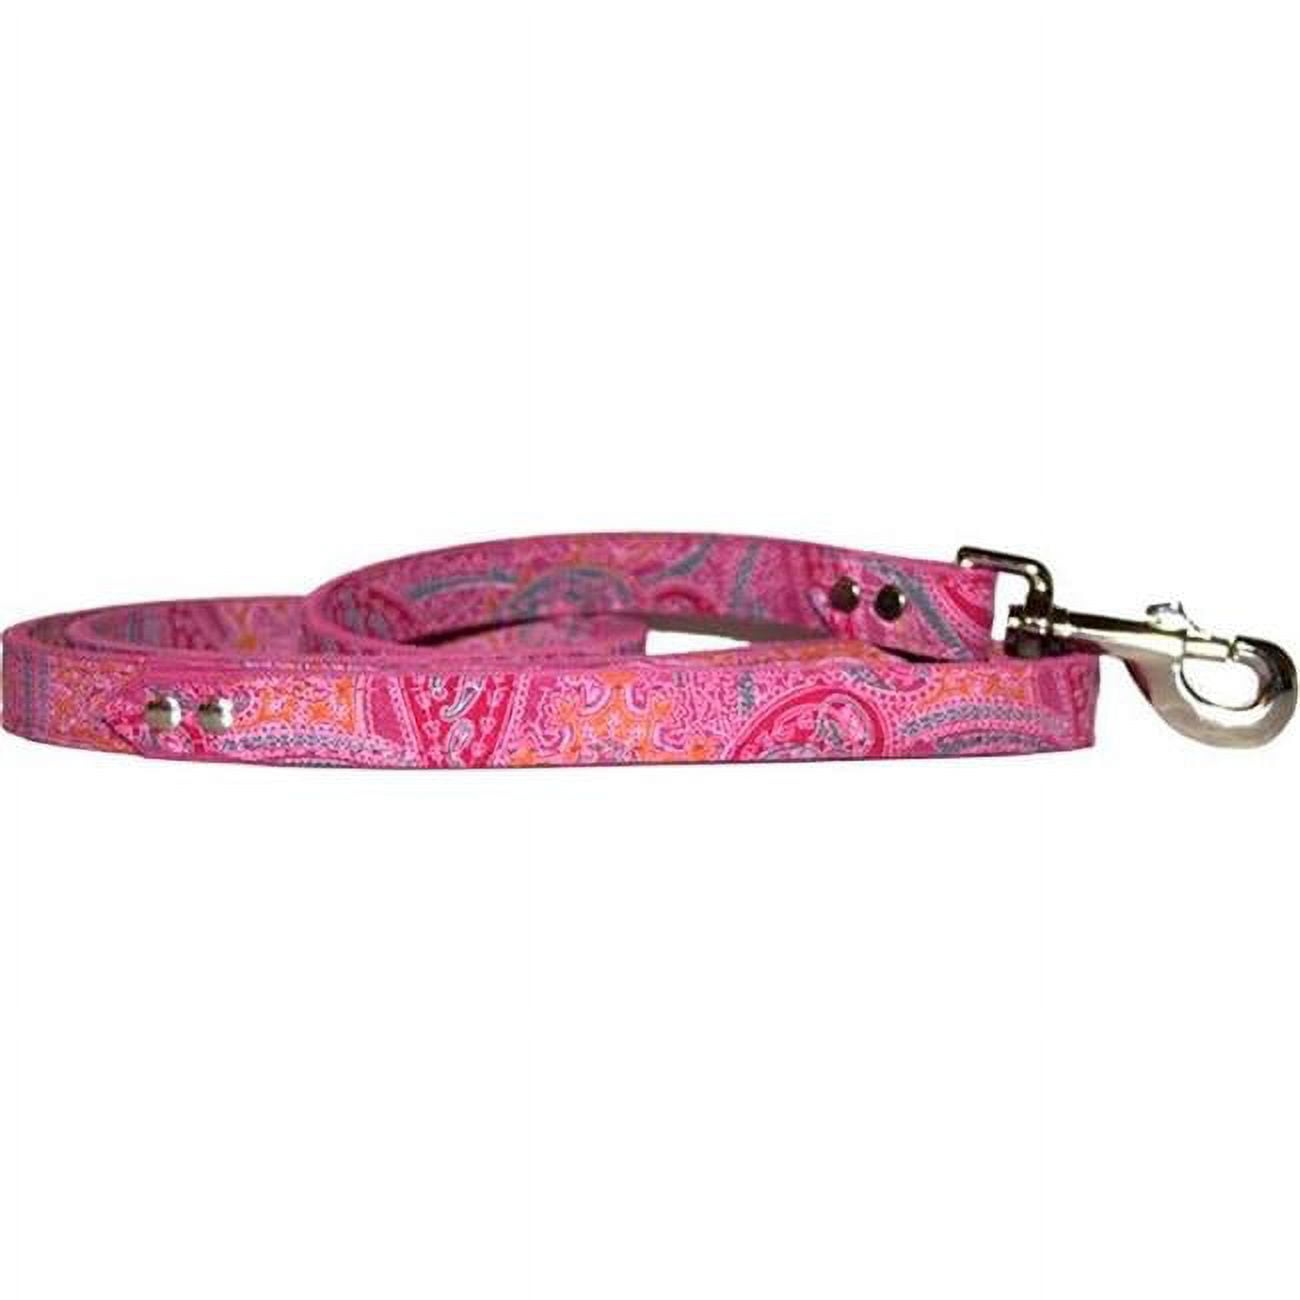 Picture of Leather Brothers 6255-PK 0.75 x 4 ft. Paisley Dog Leash, Pink